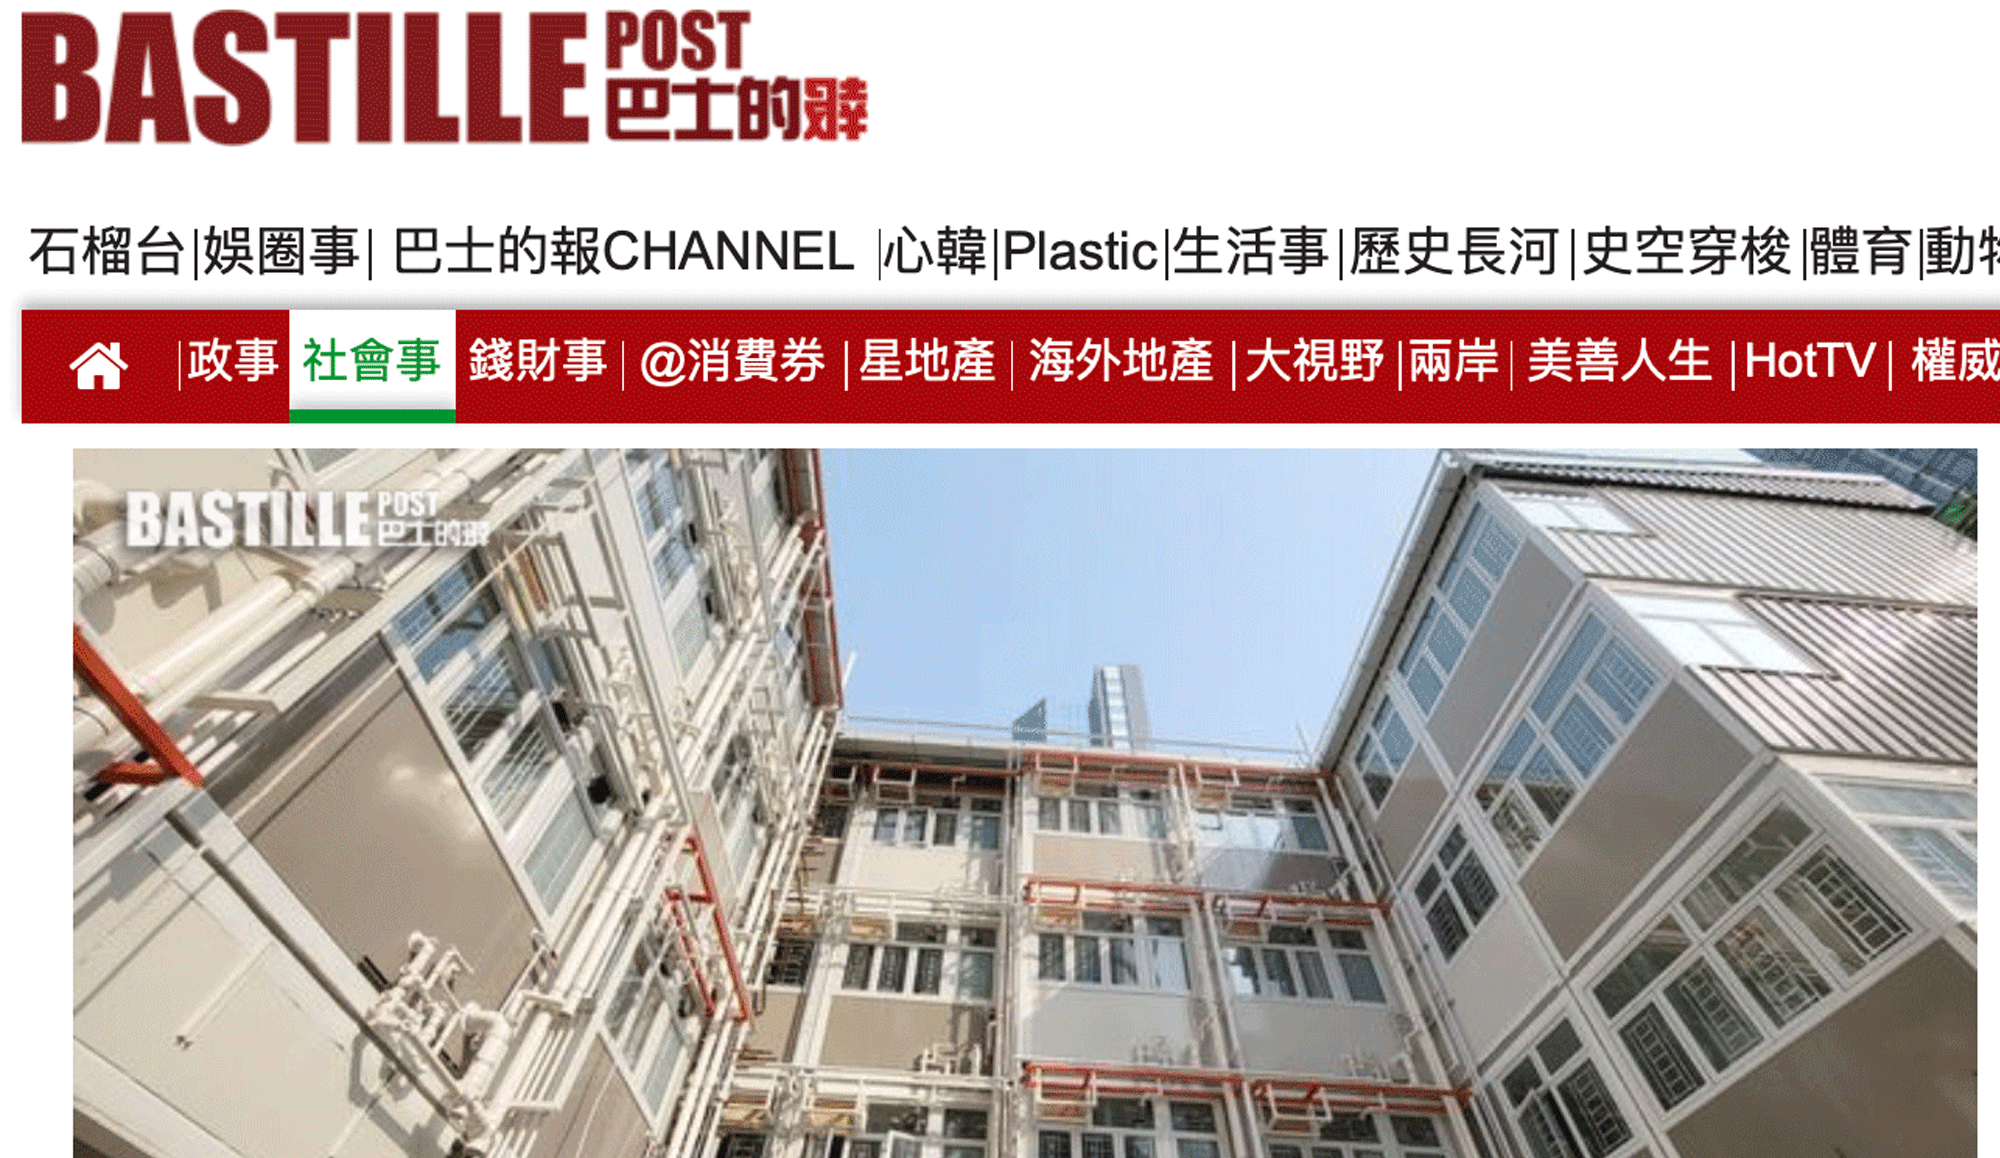 Cover Image - Bastille Post - Social Housing Project - Cheung Sha Wan “Shun Ting Terraced Home”